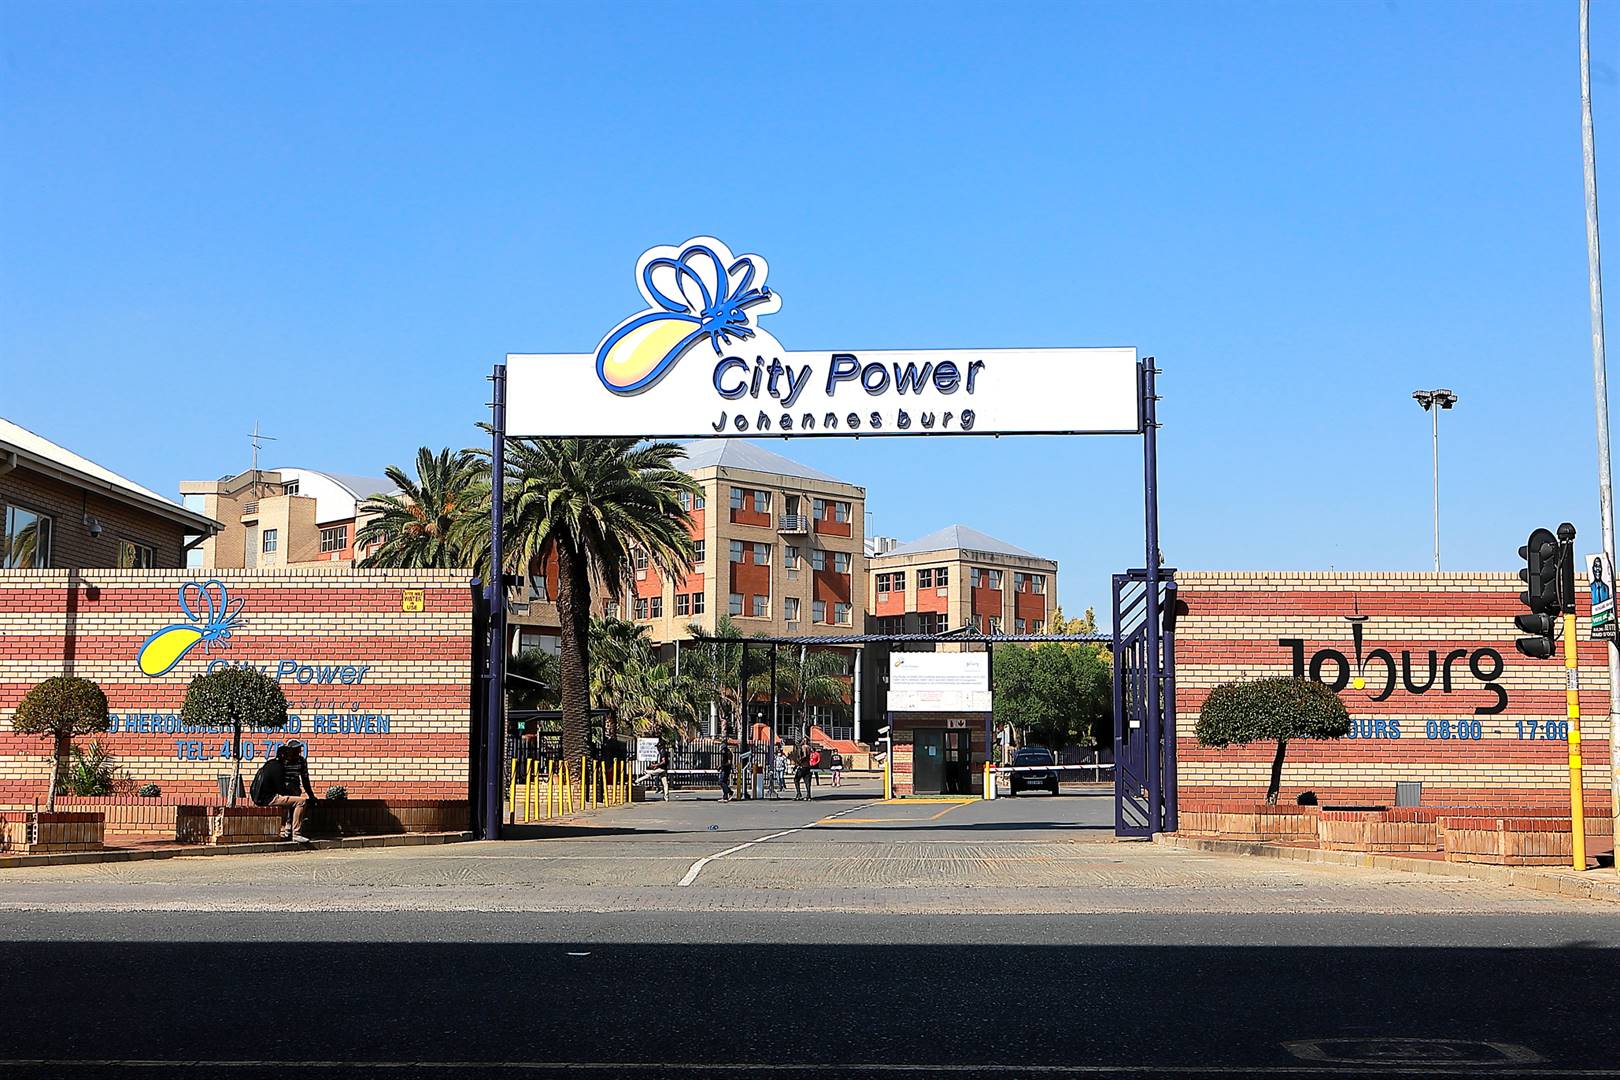 A general view of City Power’s head office in Booysens on November 11, 2021, in Johannesburg. It is reported that the country is currently experiencing load shedding due to high demand and urgent maintenance being performed at certain power stations. Photo by Gallo Images/Fani Mahuntsi